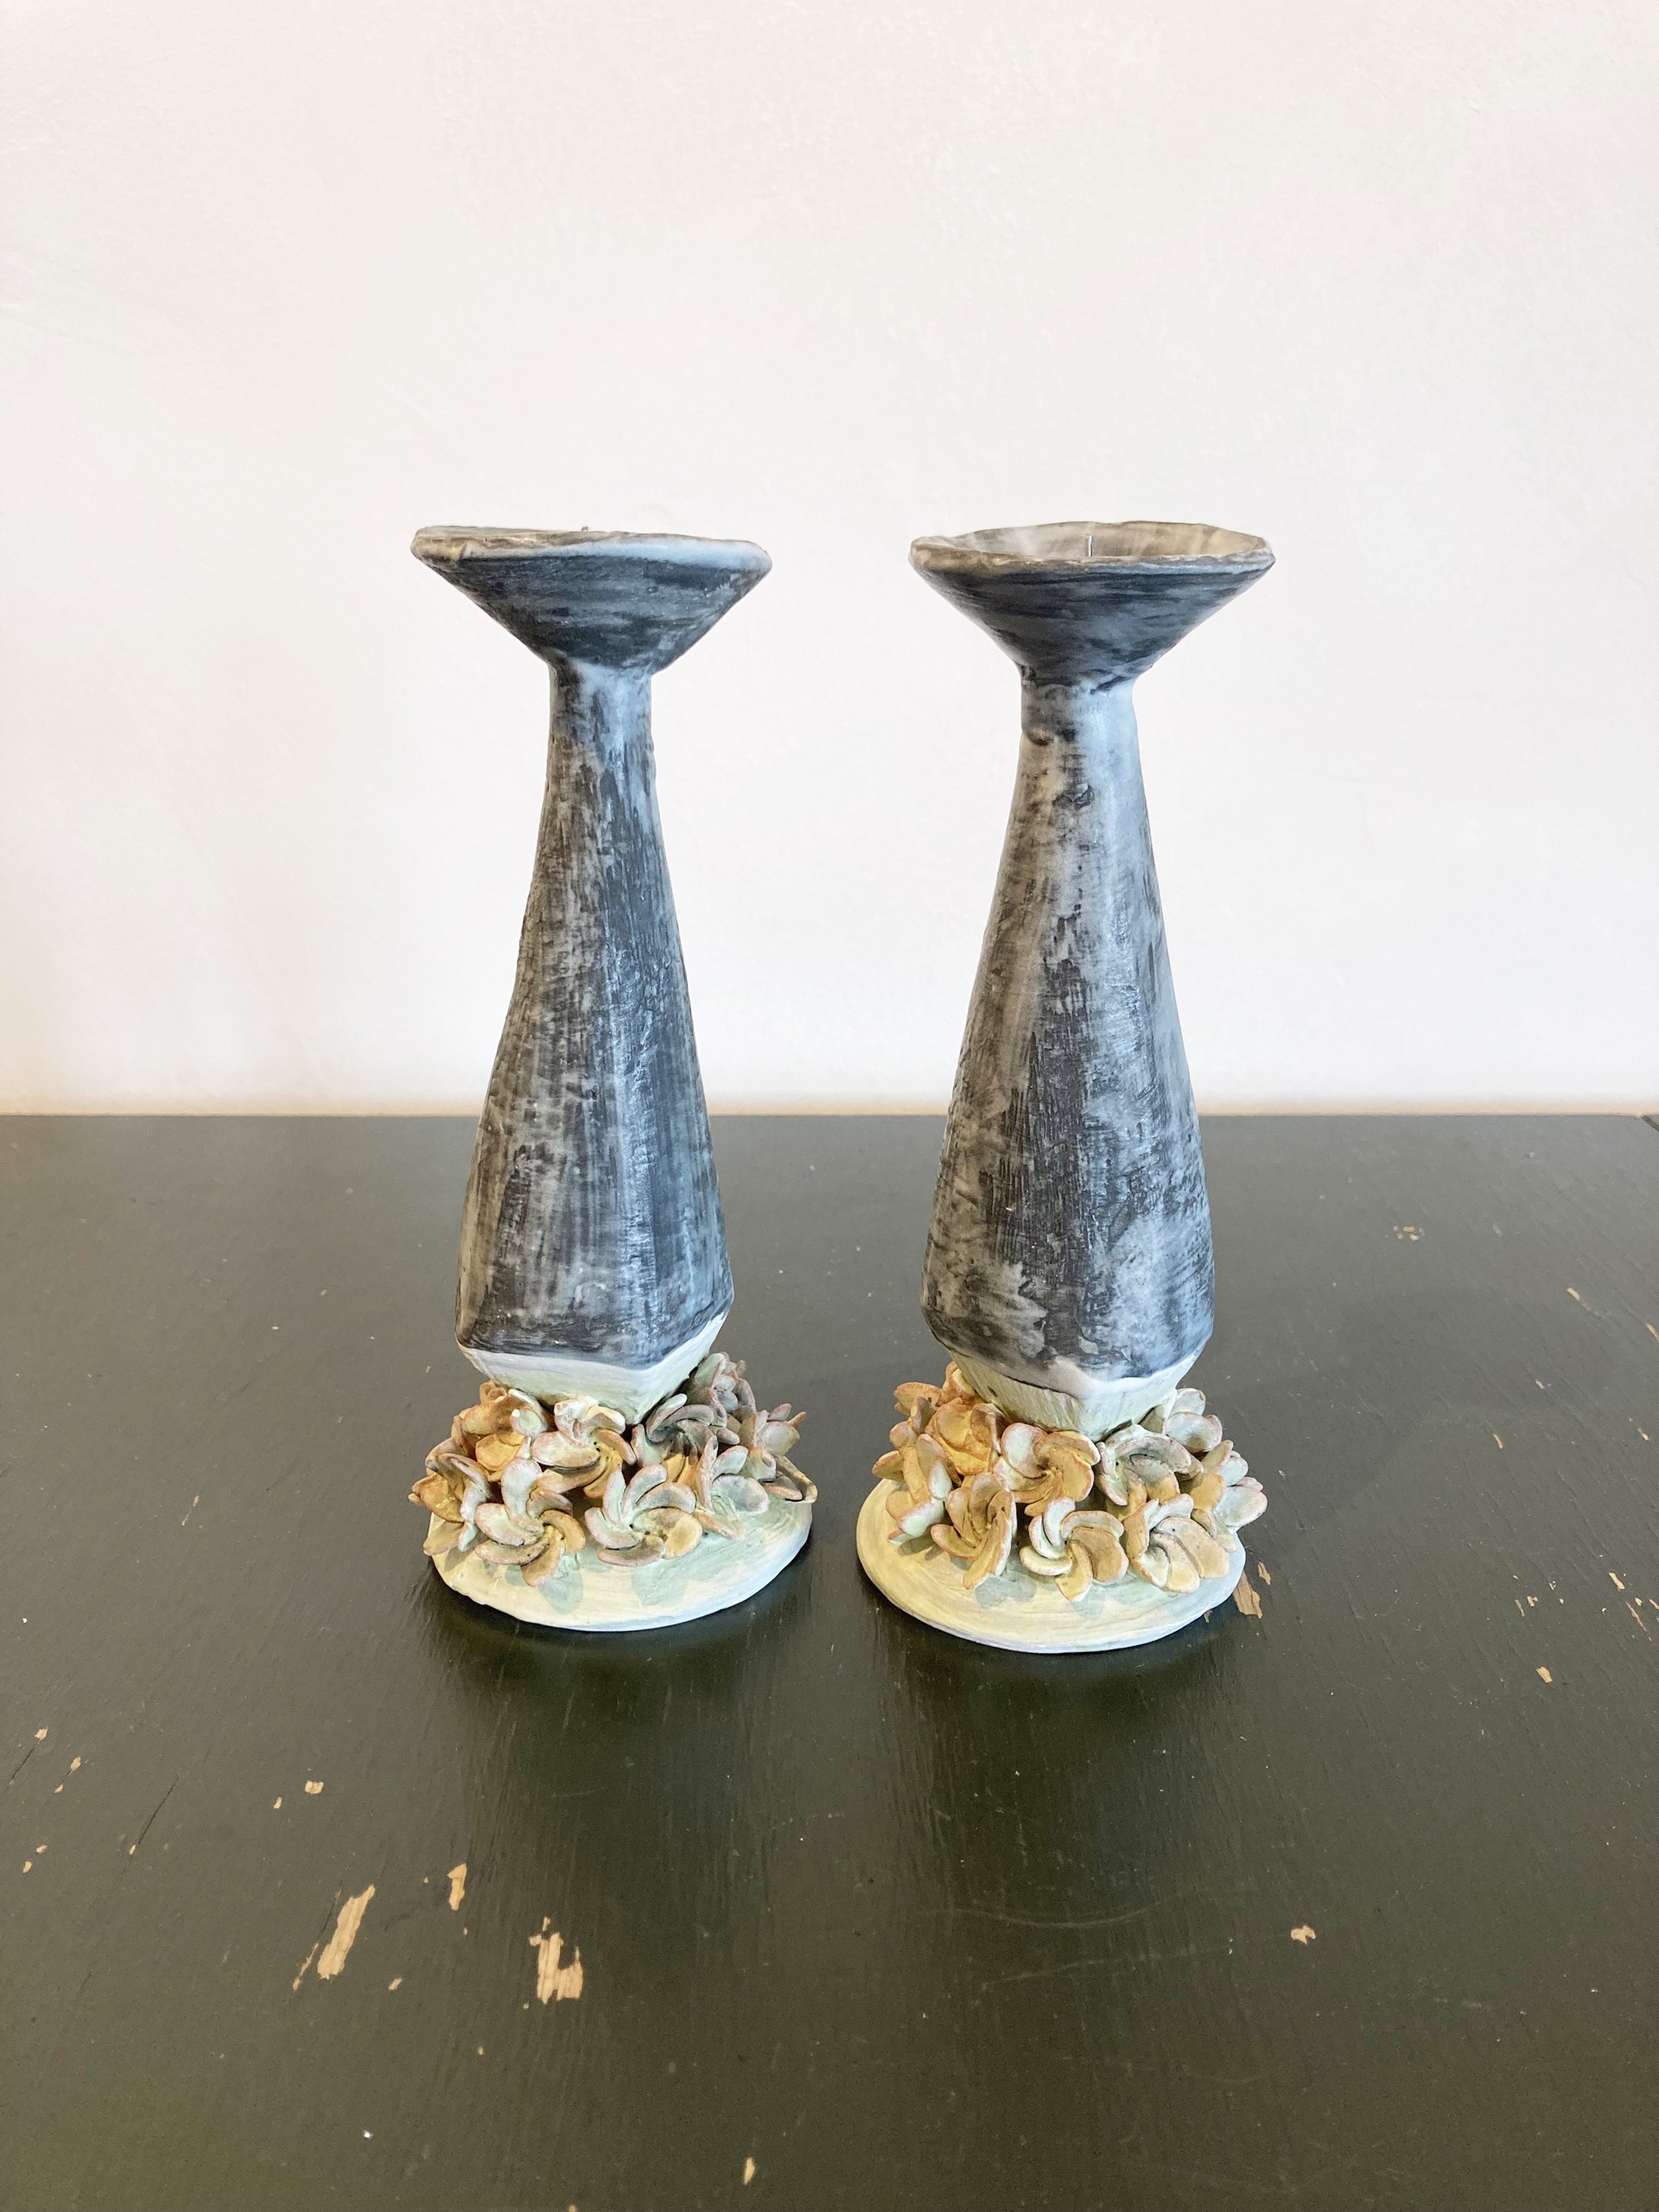 Black Candle Pair with Flowers by Maggie Jaszczak